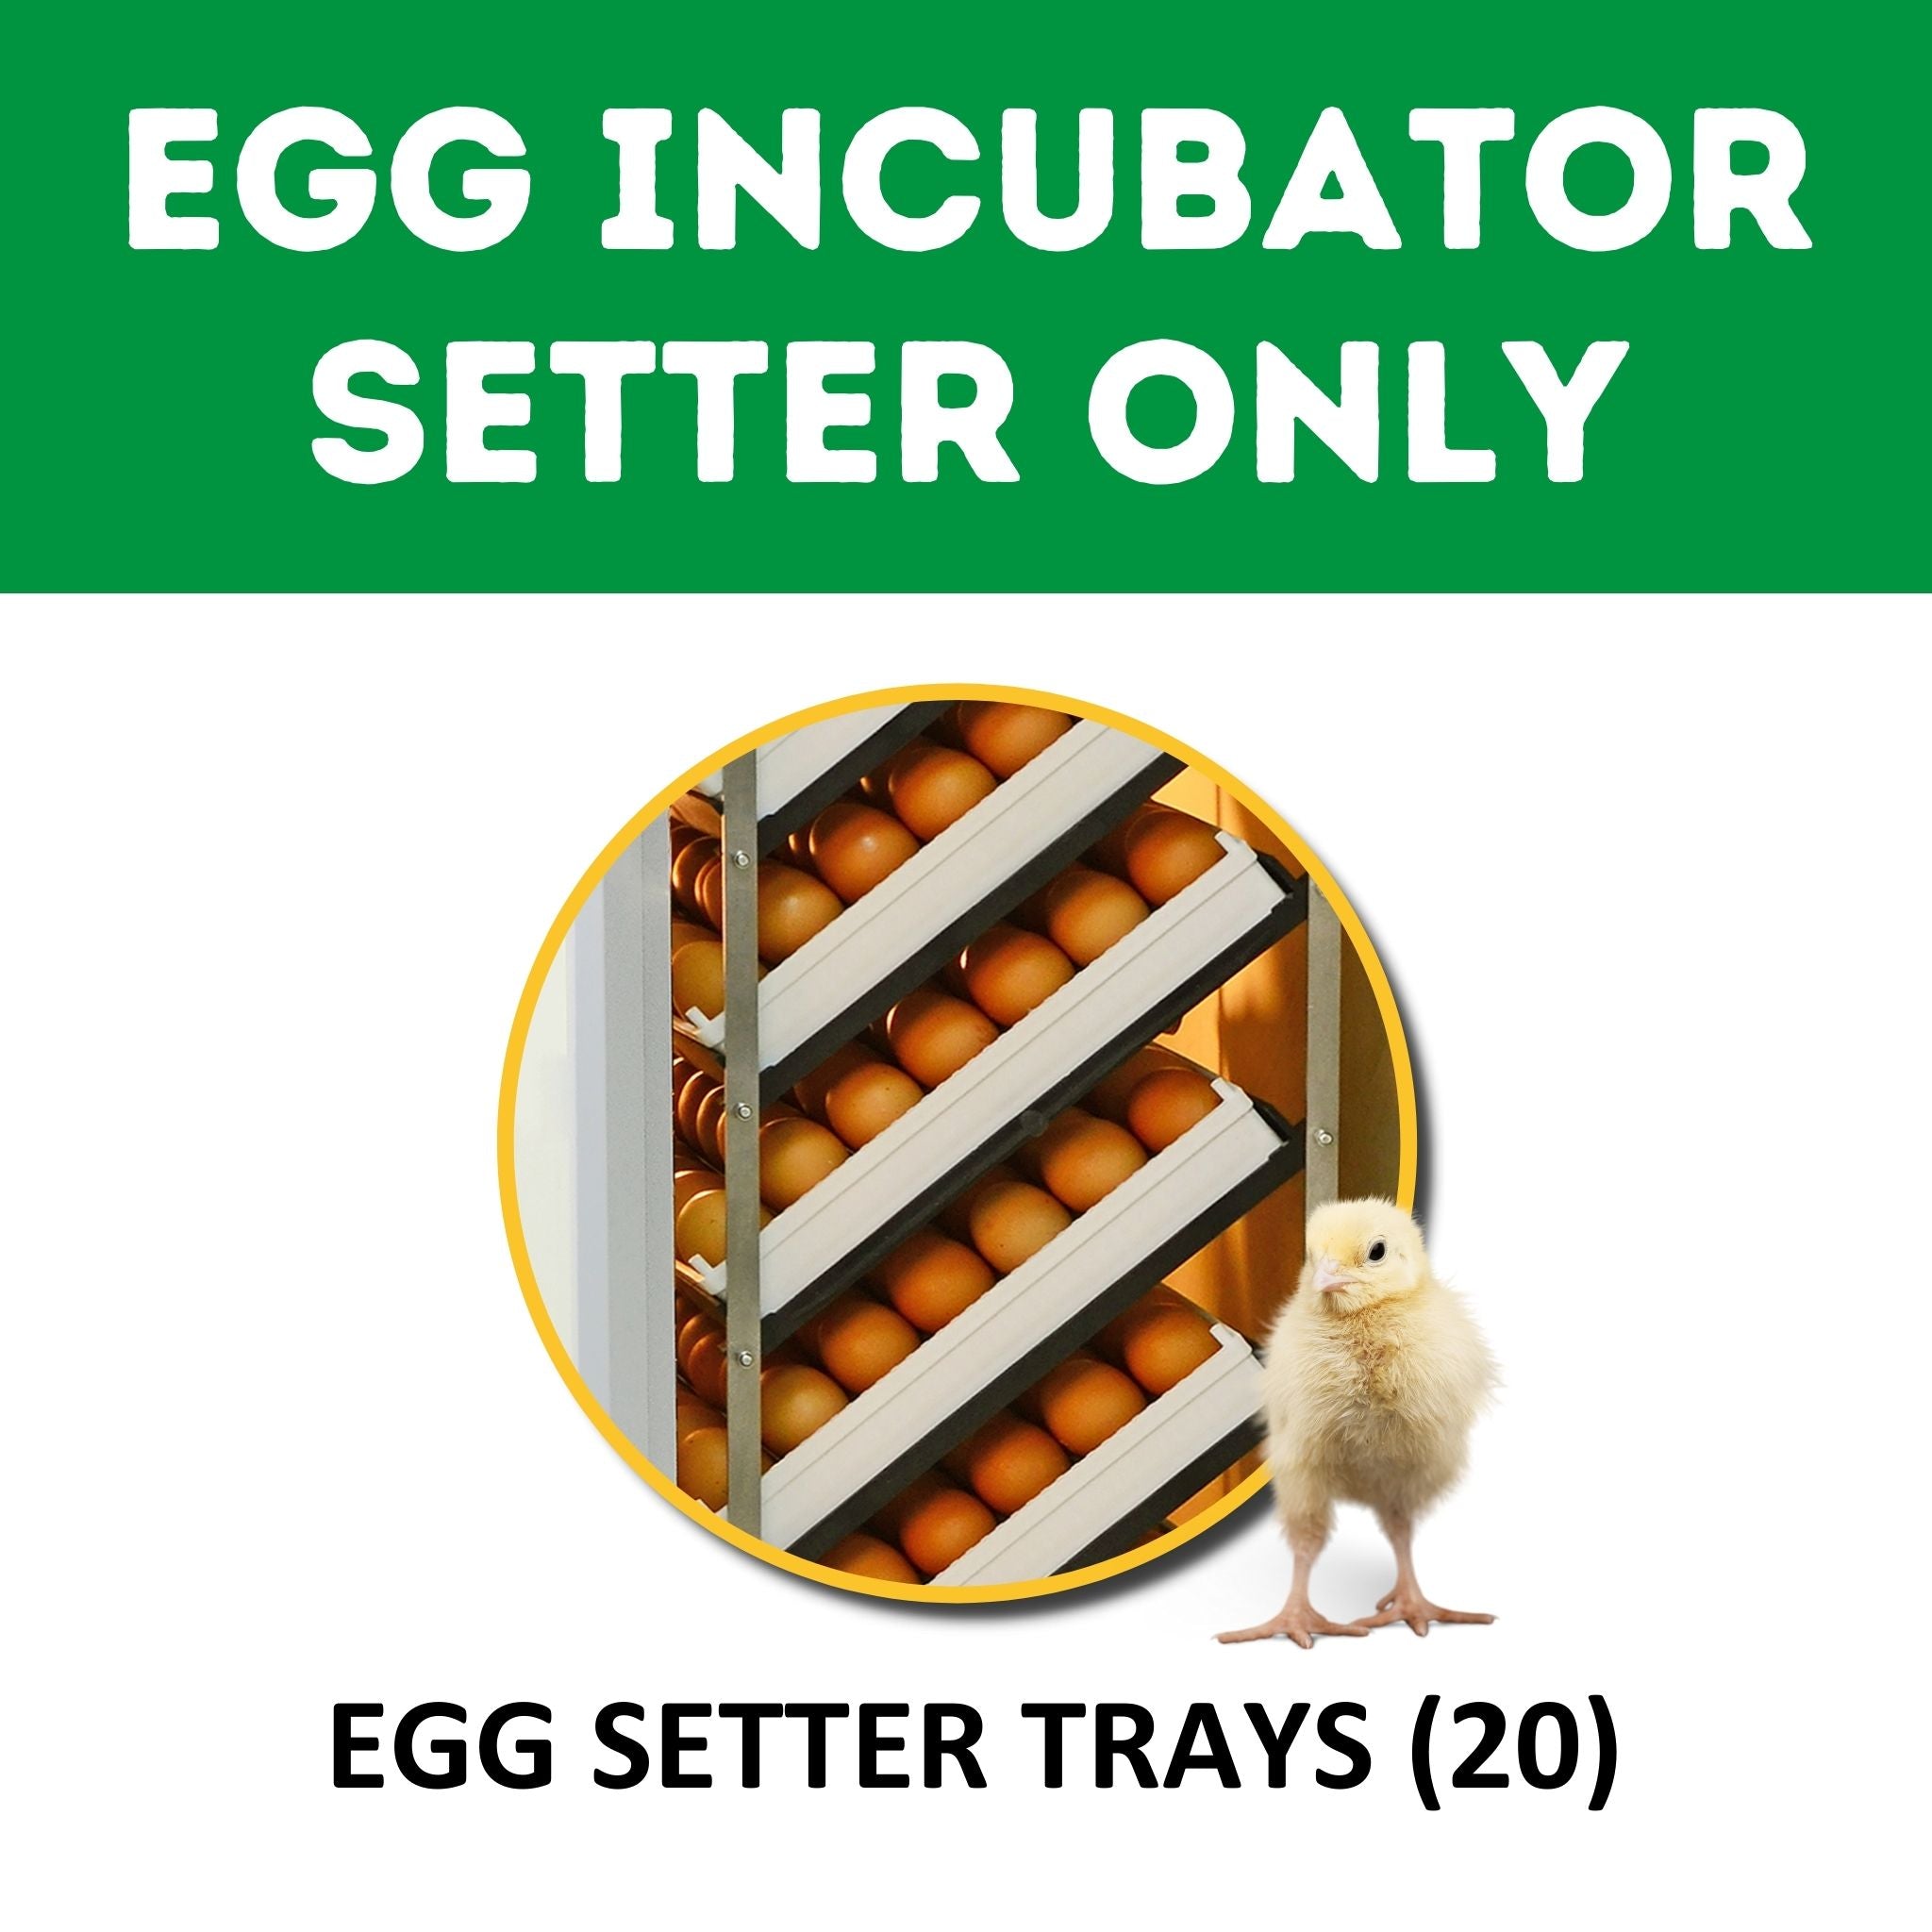 Hatching Time Cimuka. Image shows that incubator is setter only. Includes 20 setter trays.